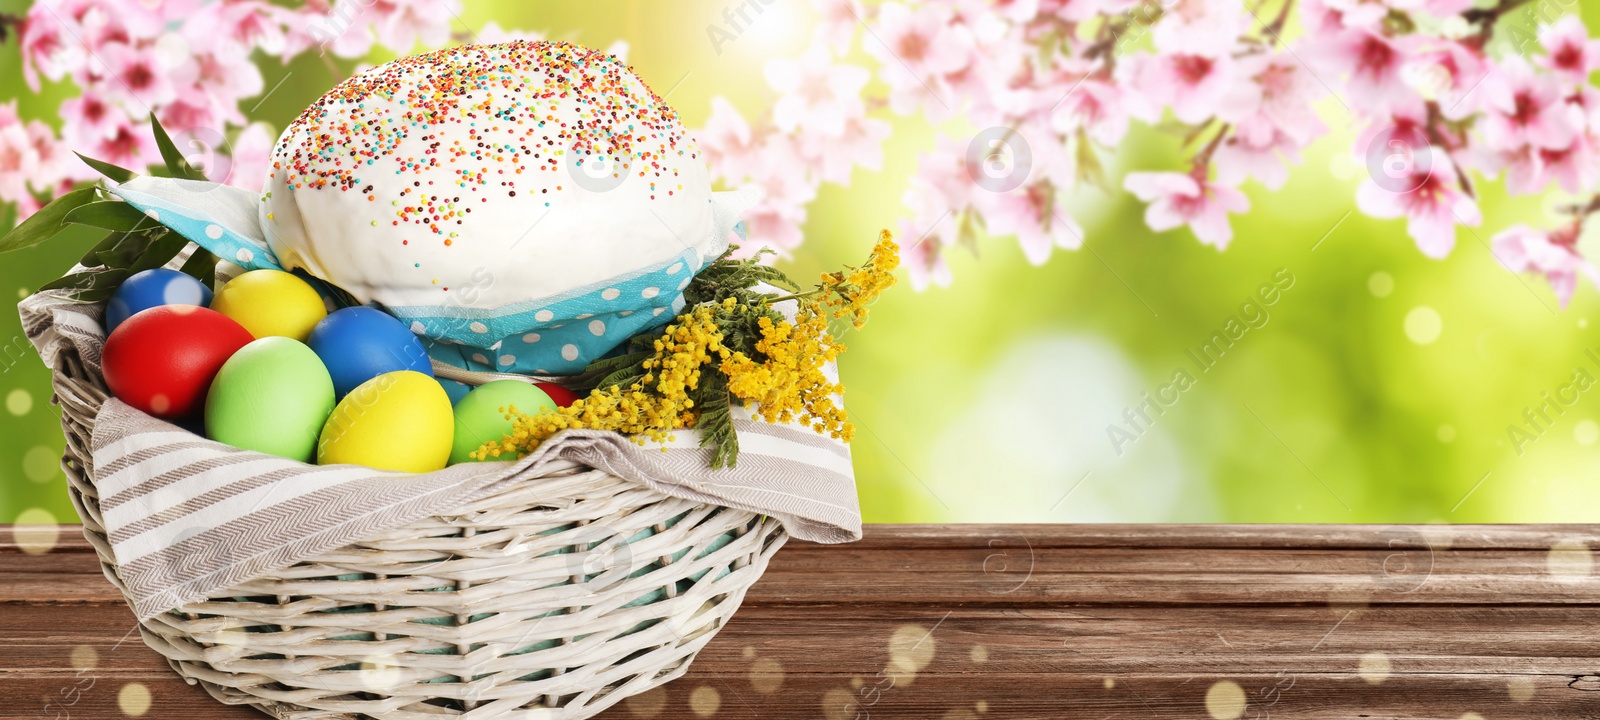 Image of Basket with traditional Easter cake, eggs and flowers on wooden table outdoors, space for text. Banner design